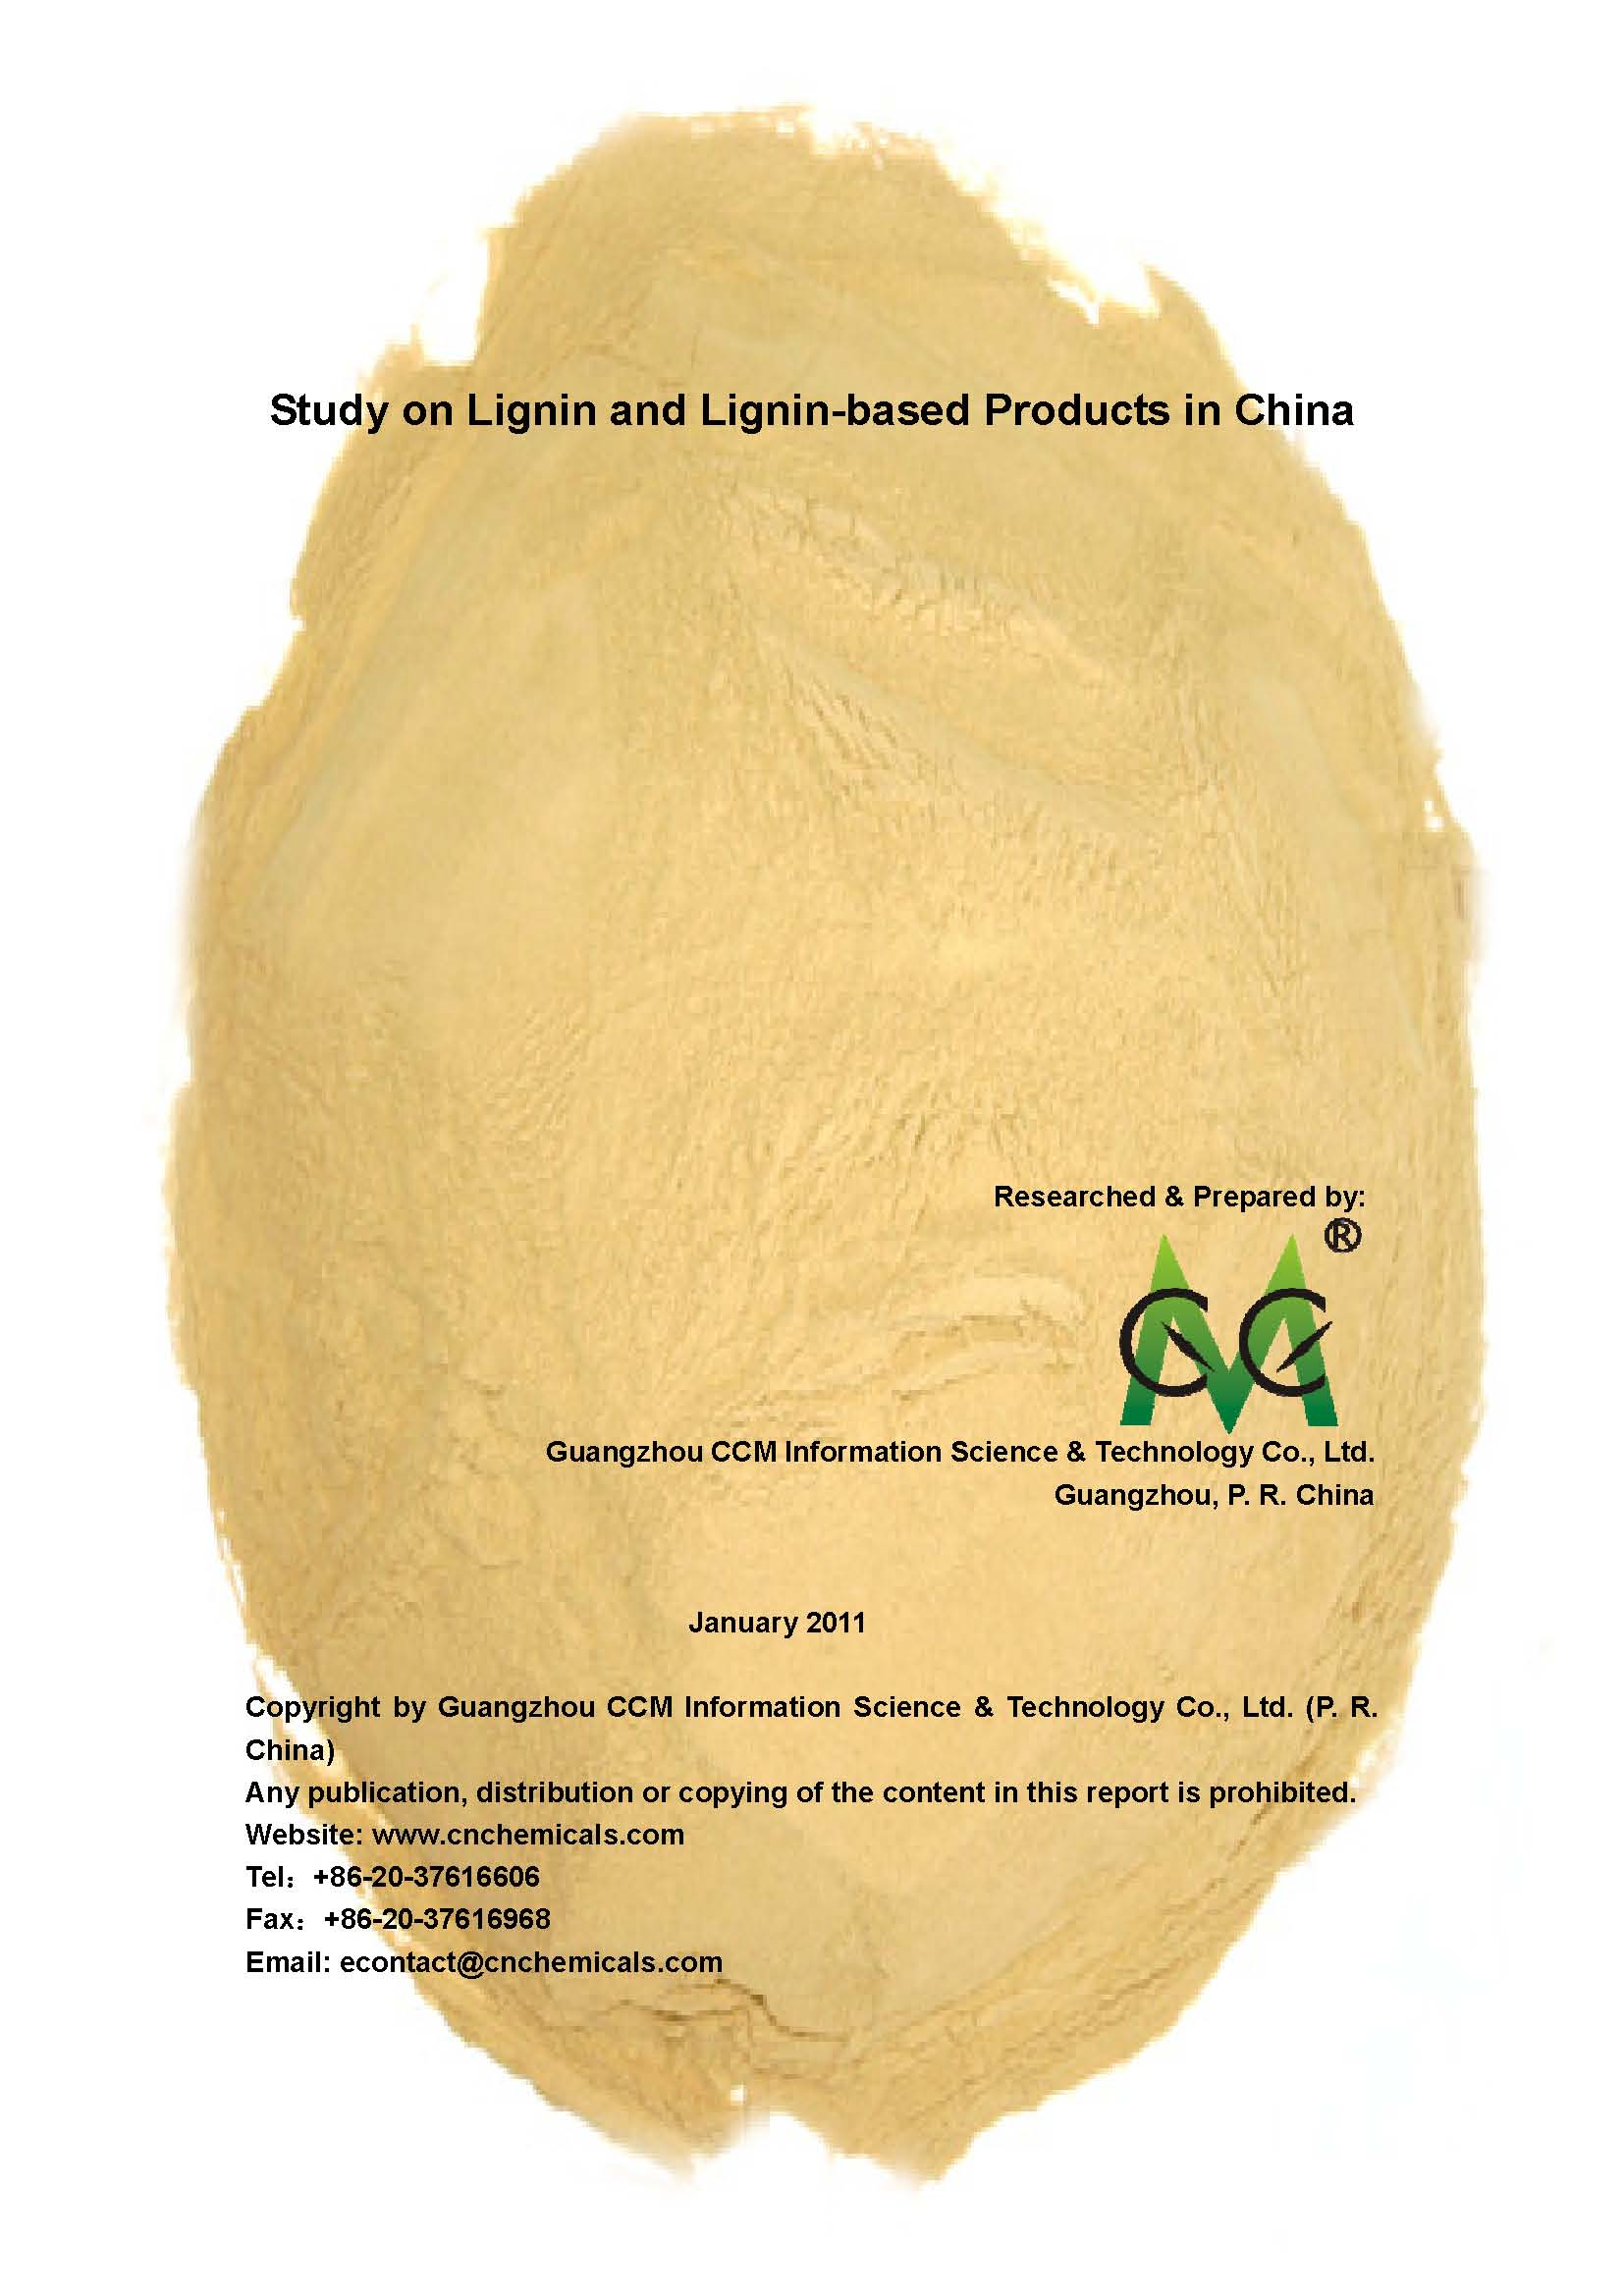 Study on Lignin and Lignin-based Products in China